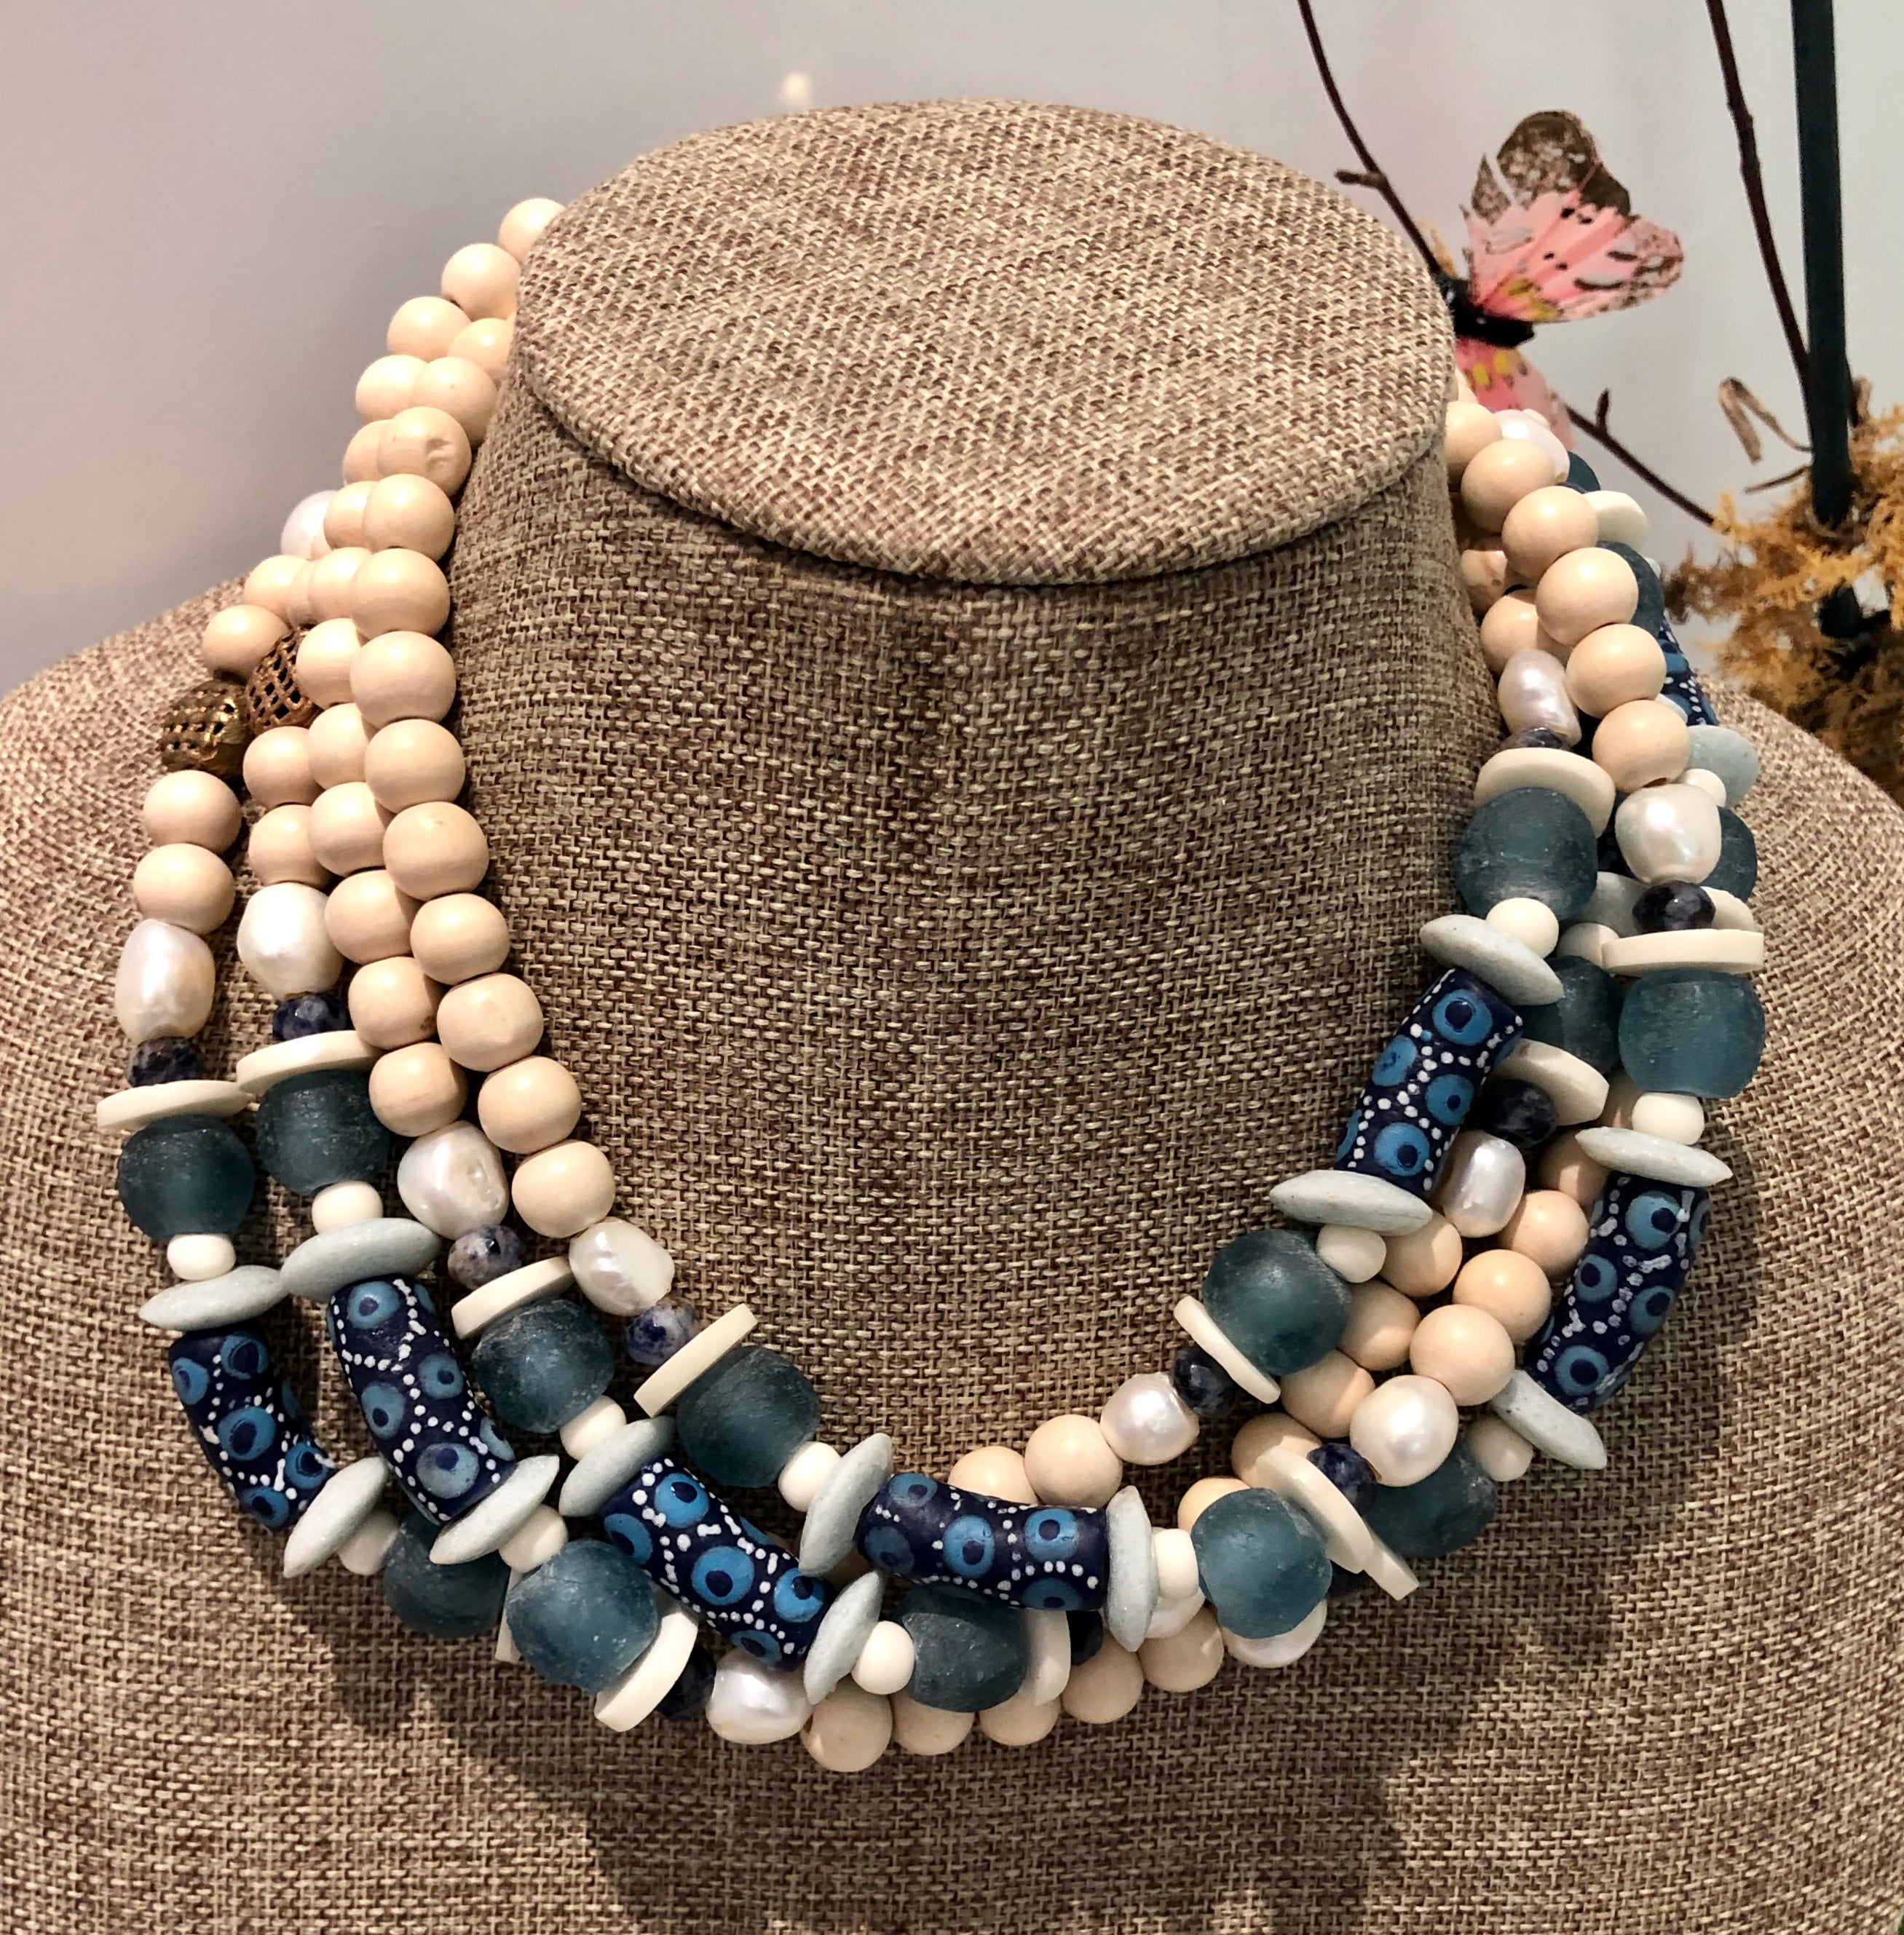 freshwater baroque pearl, wood, blue african bead and sodalite necklace